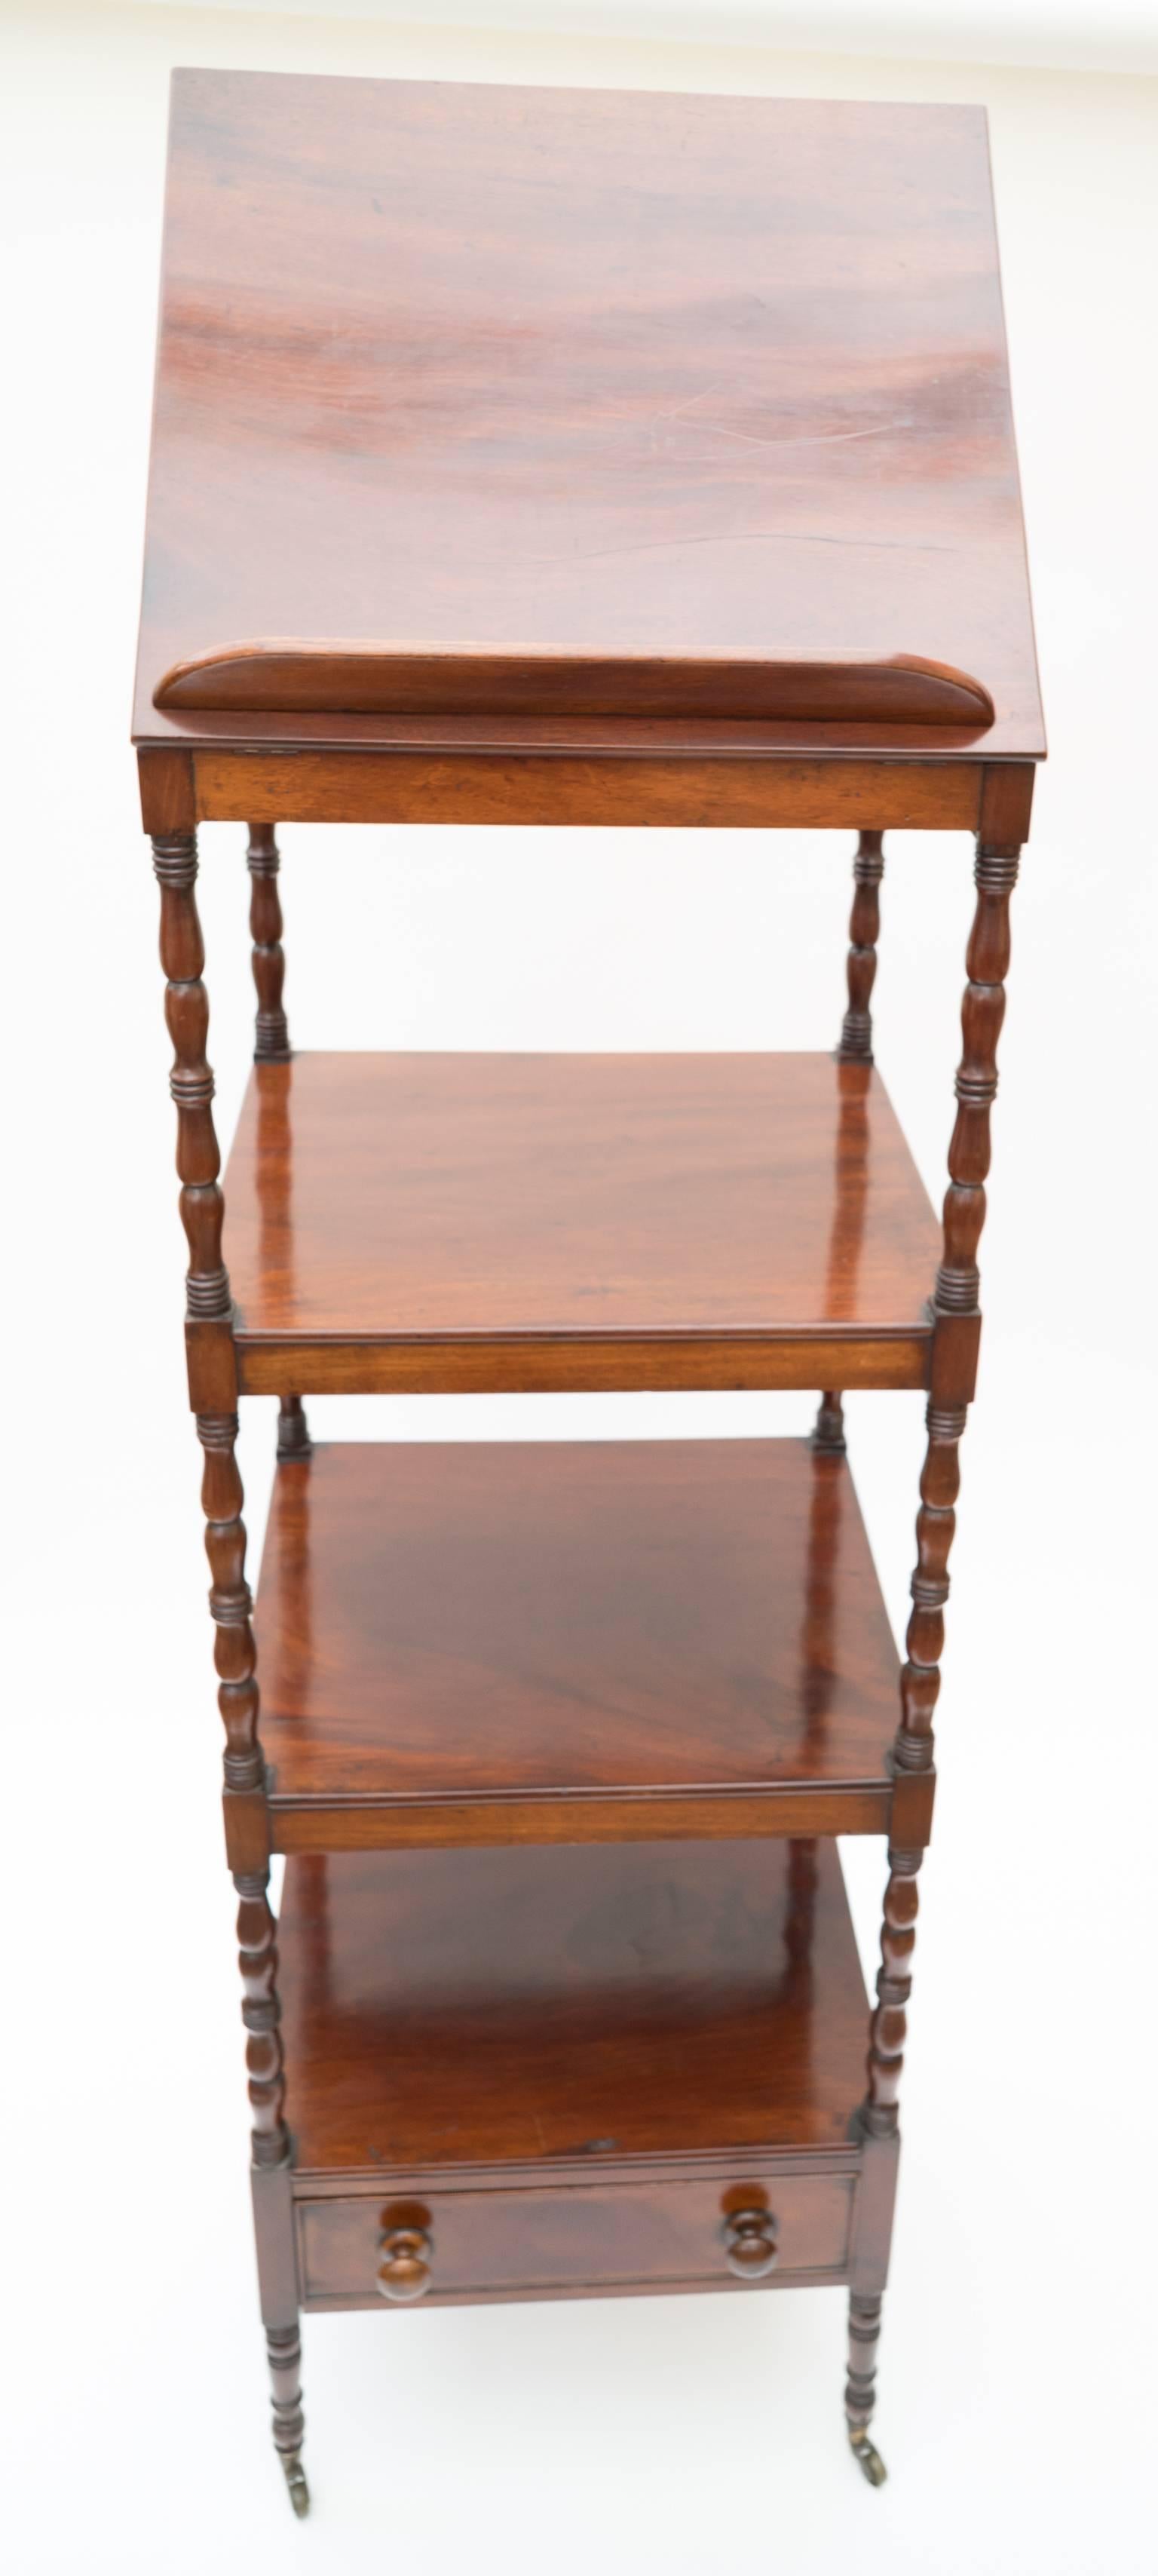 A Regency four-tier mahogany whatnot with a rising reading stand,
1820.

The lower platforms with fine turned uprights the lower shelf has a useful drawer below. 

Standing on brass casters.